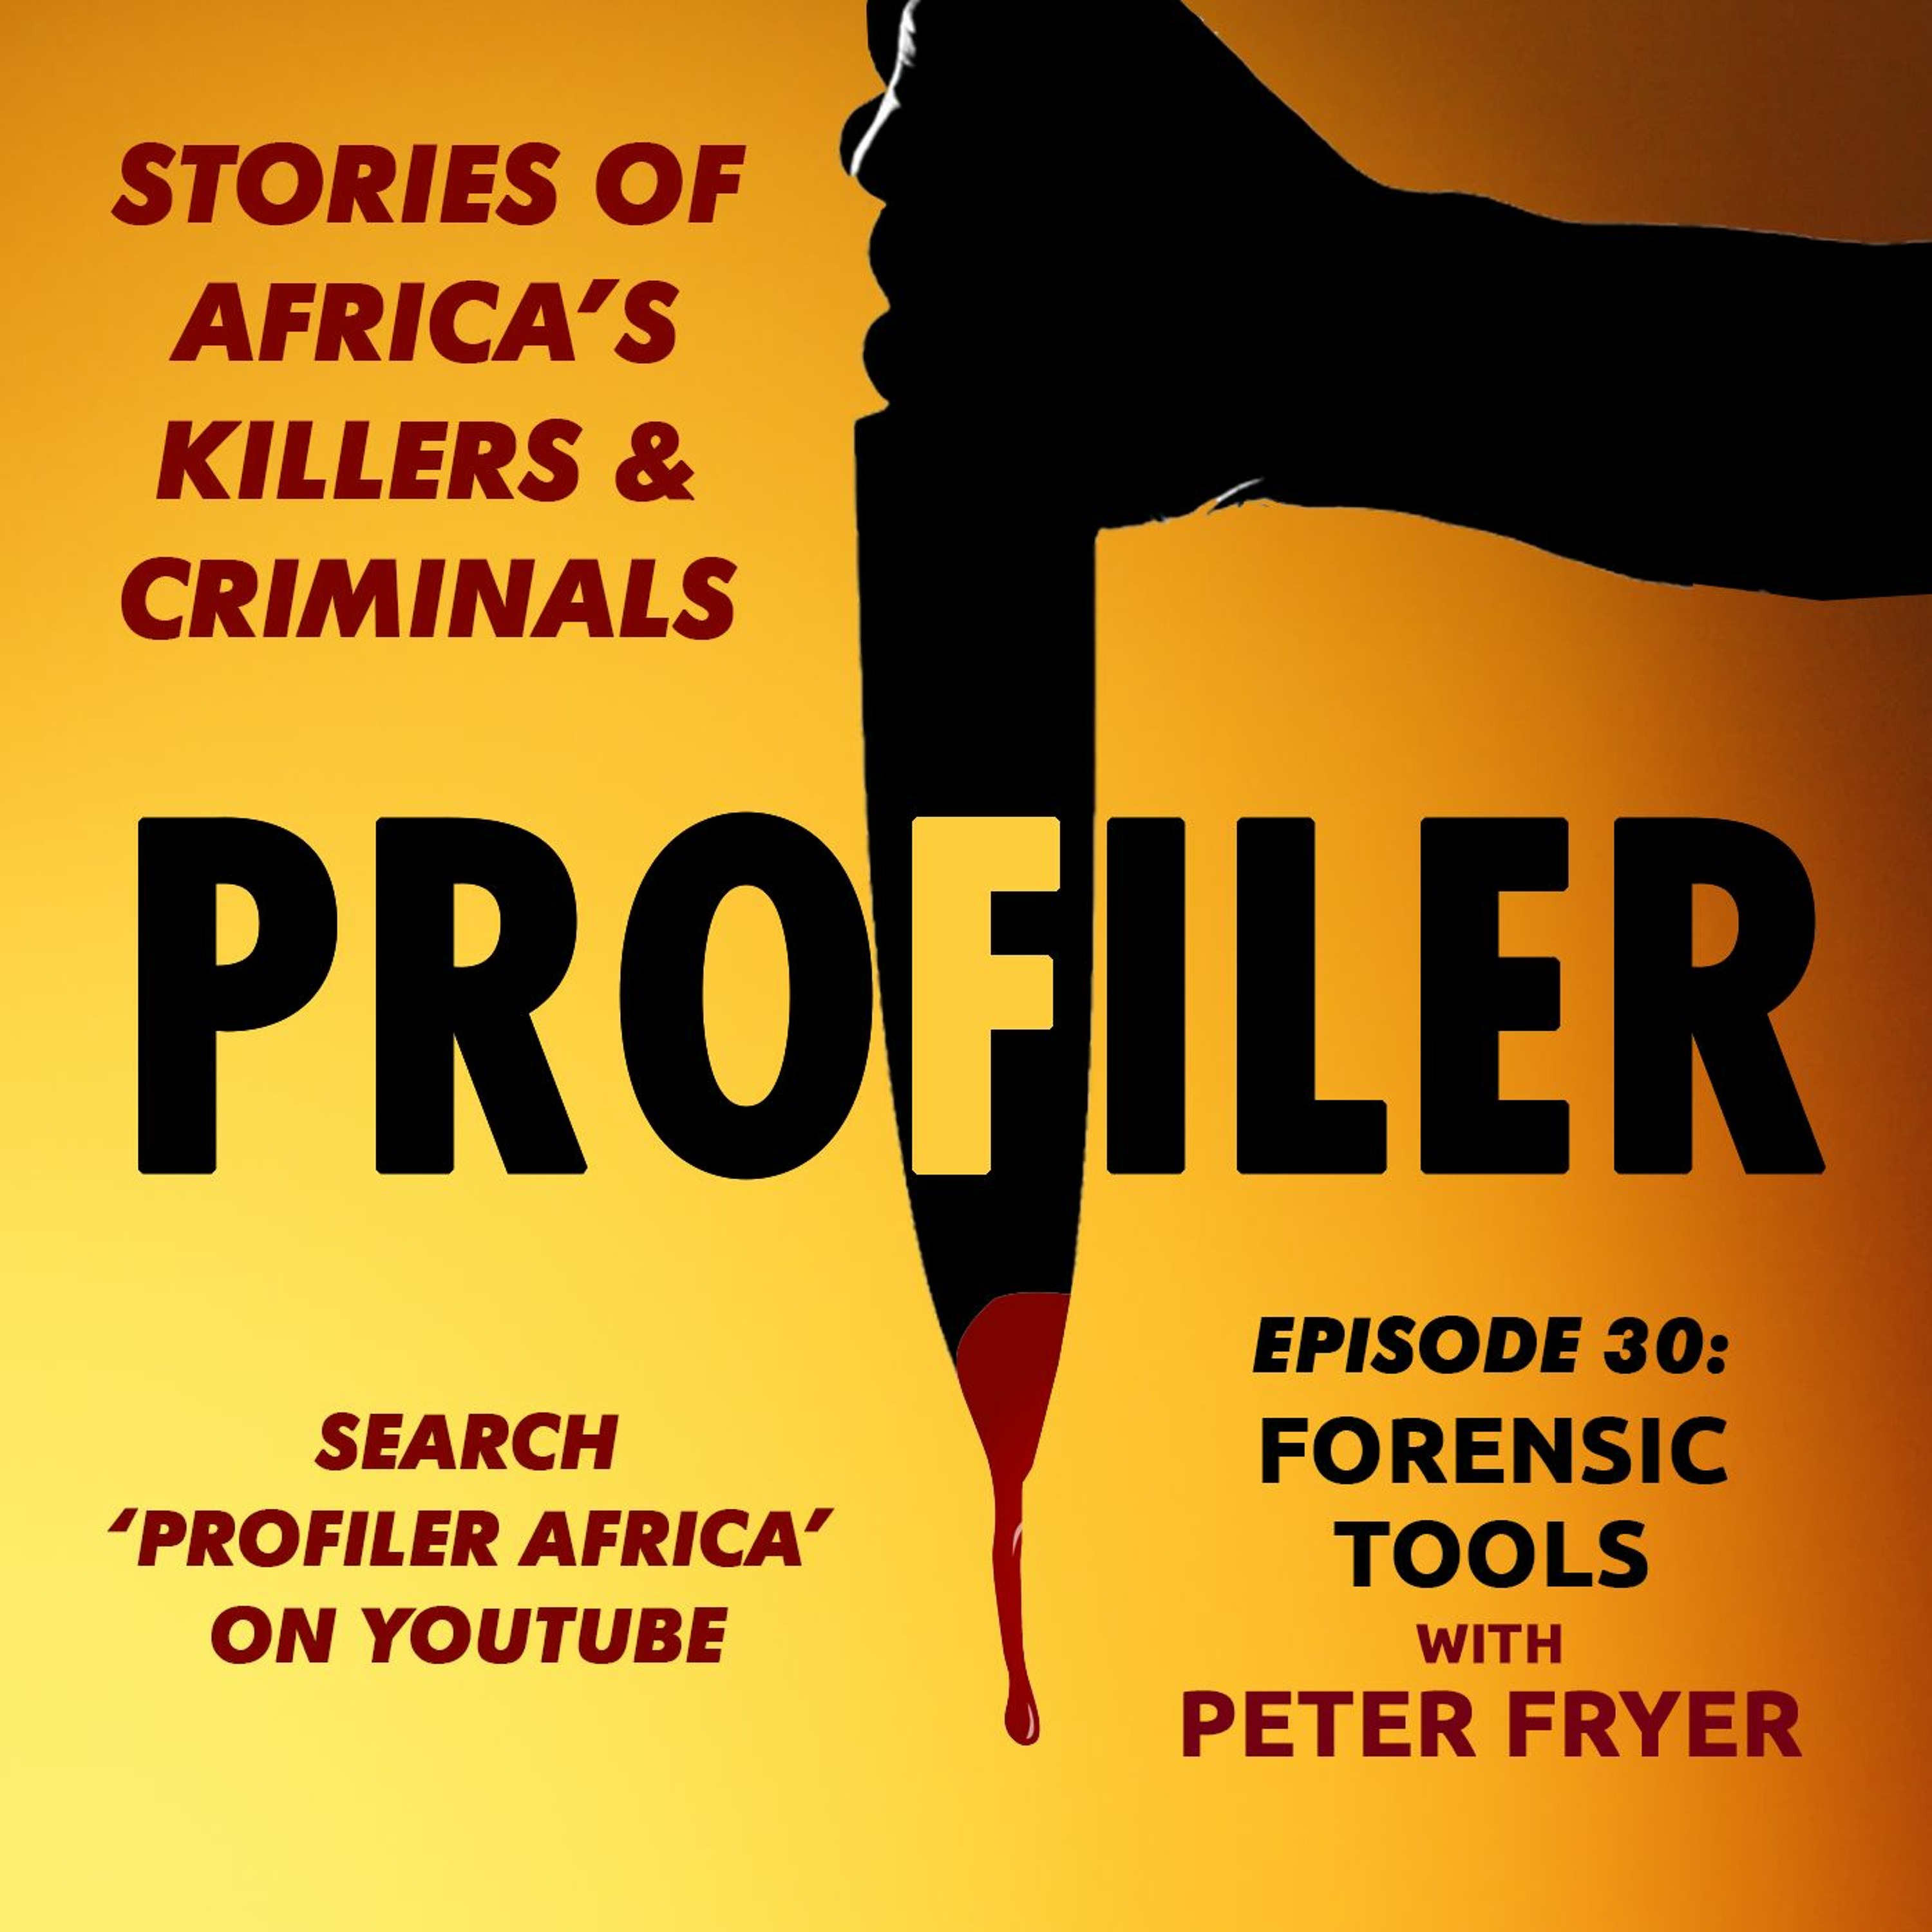 PROFILER Episode 30 - Forensic Tools With Peter Fryer